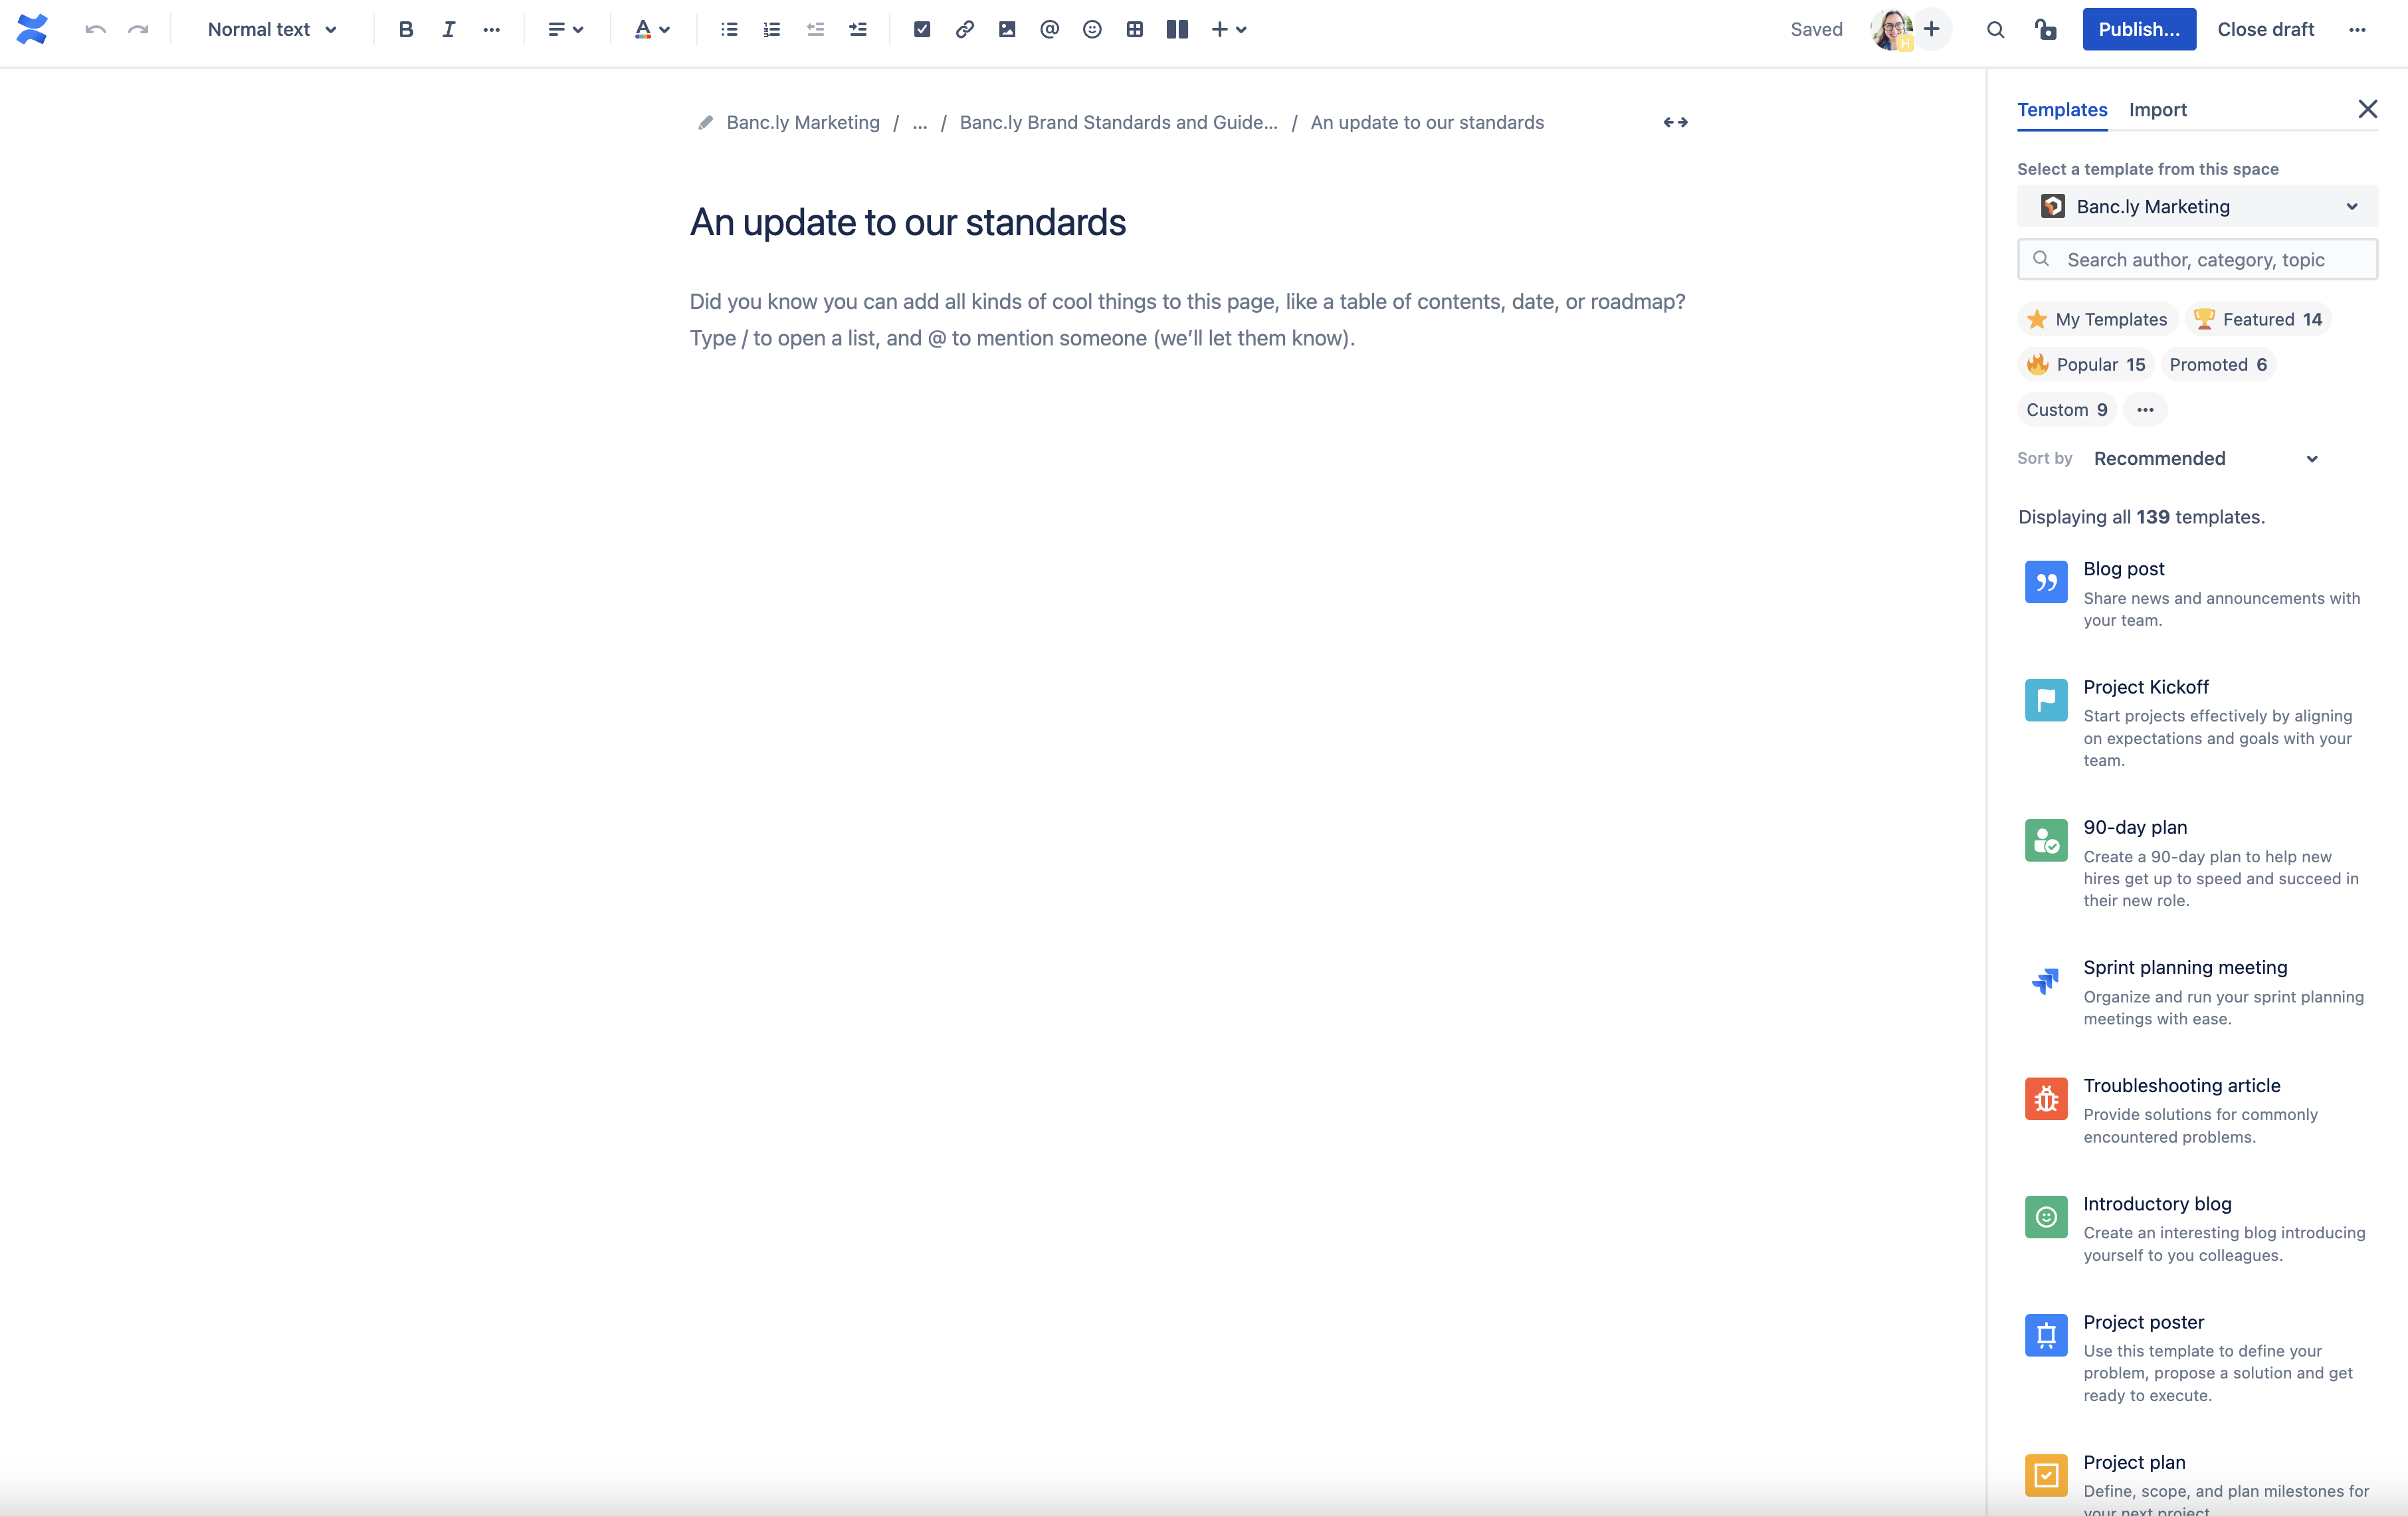 Preview of a template in Confluence Cloud